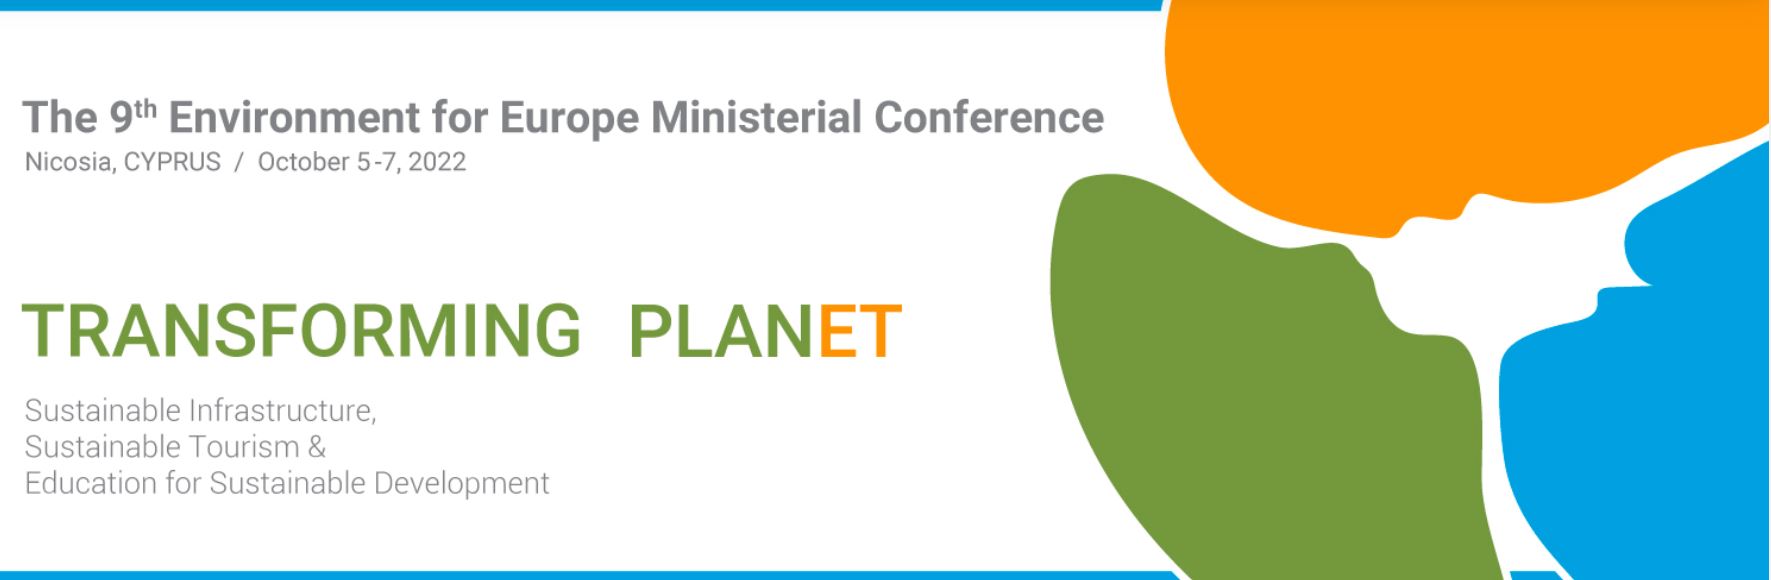 Ninth "Environment for Europe" Ministerial Conference  "TRANSFORMING PLANET"